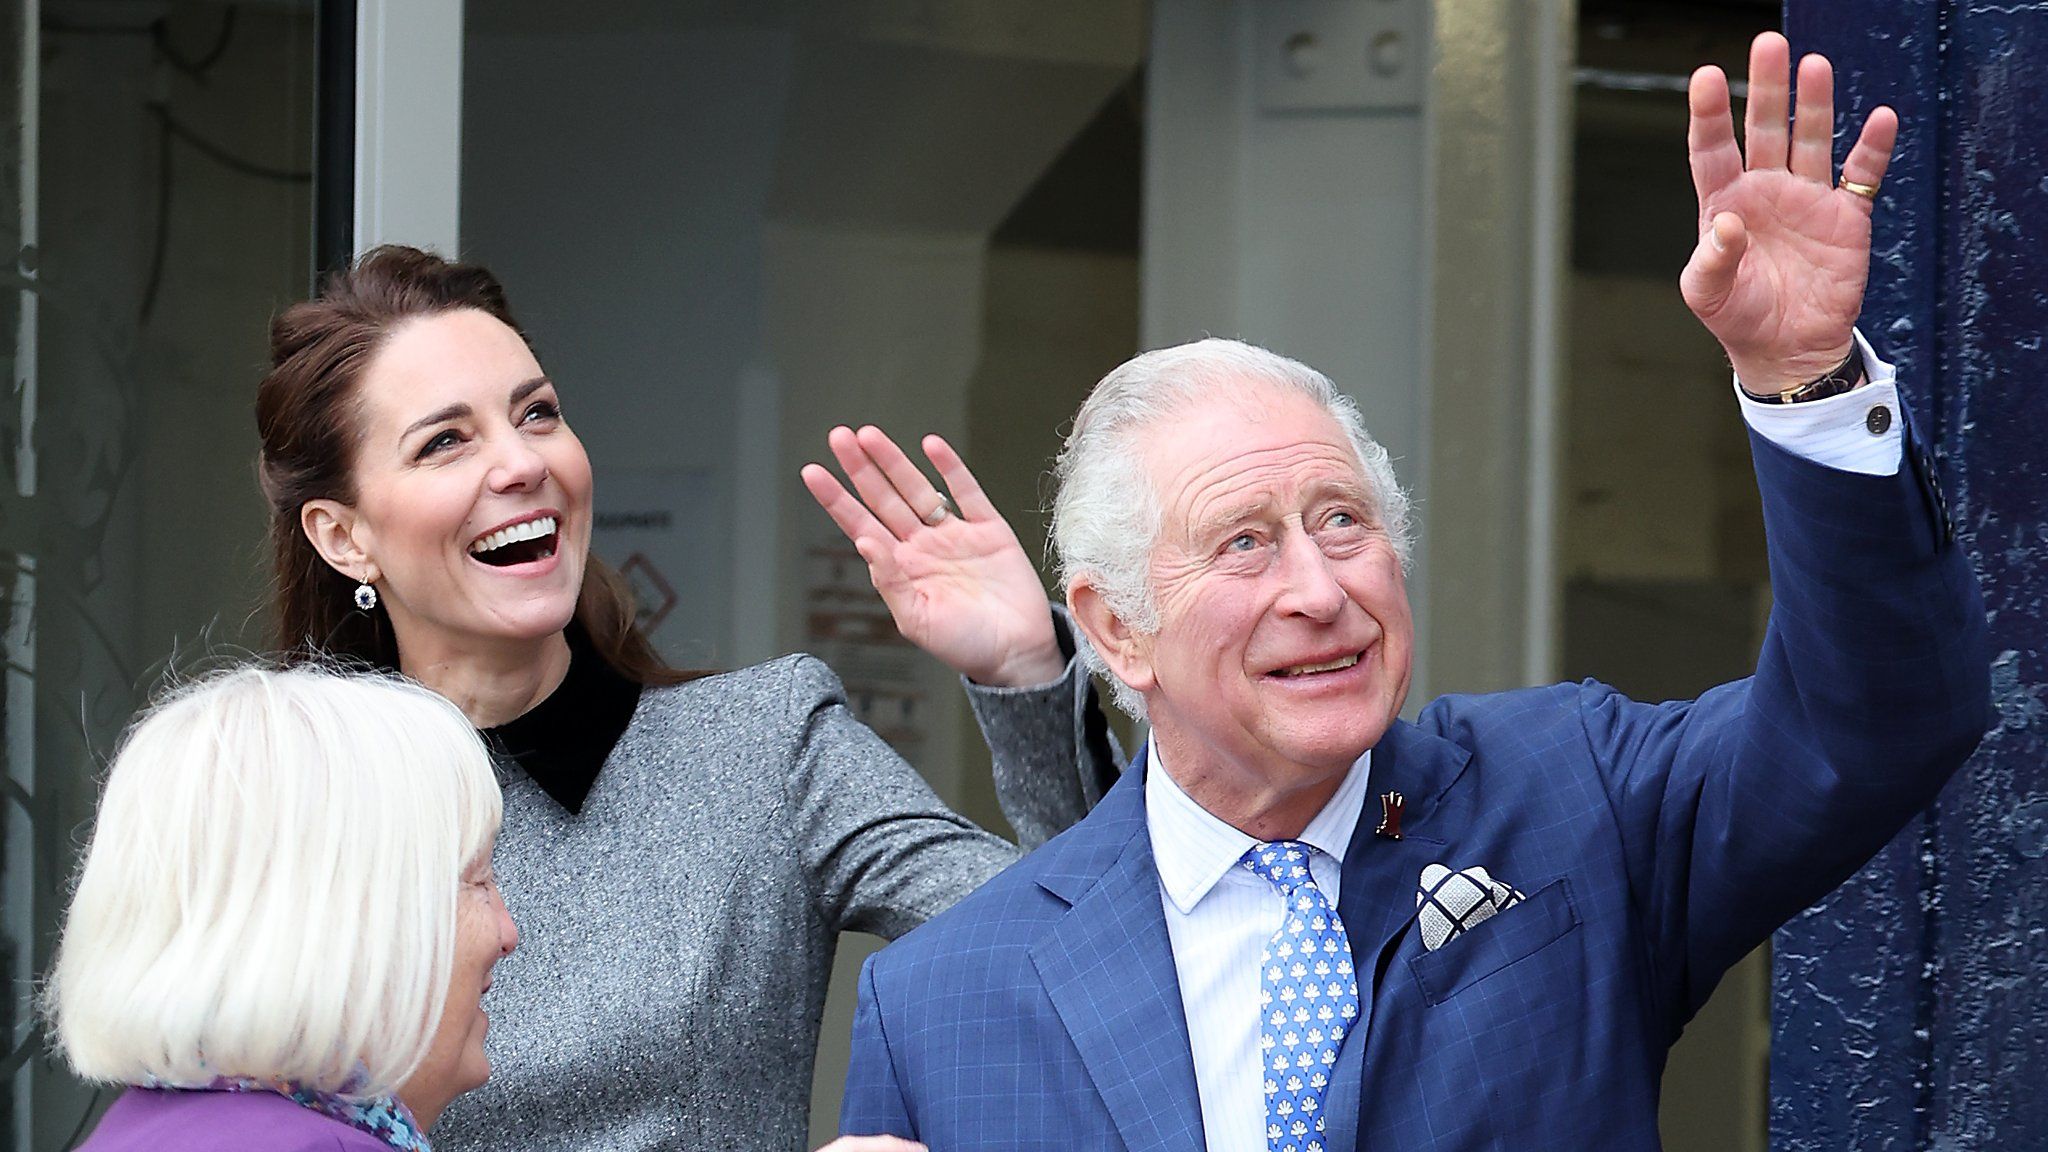 The Princess of Wales and King Charles III seen during a visit to The Prince's Foundation training site for arts and culture in 2022